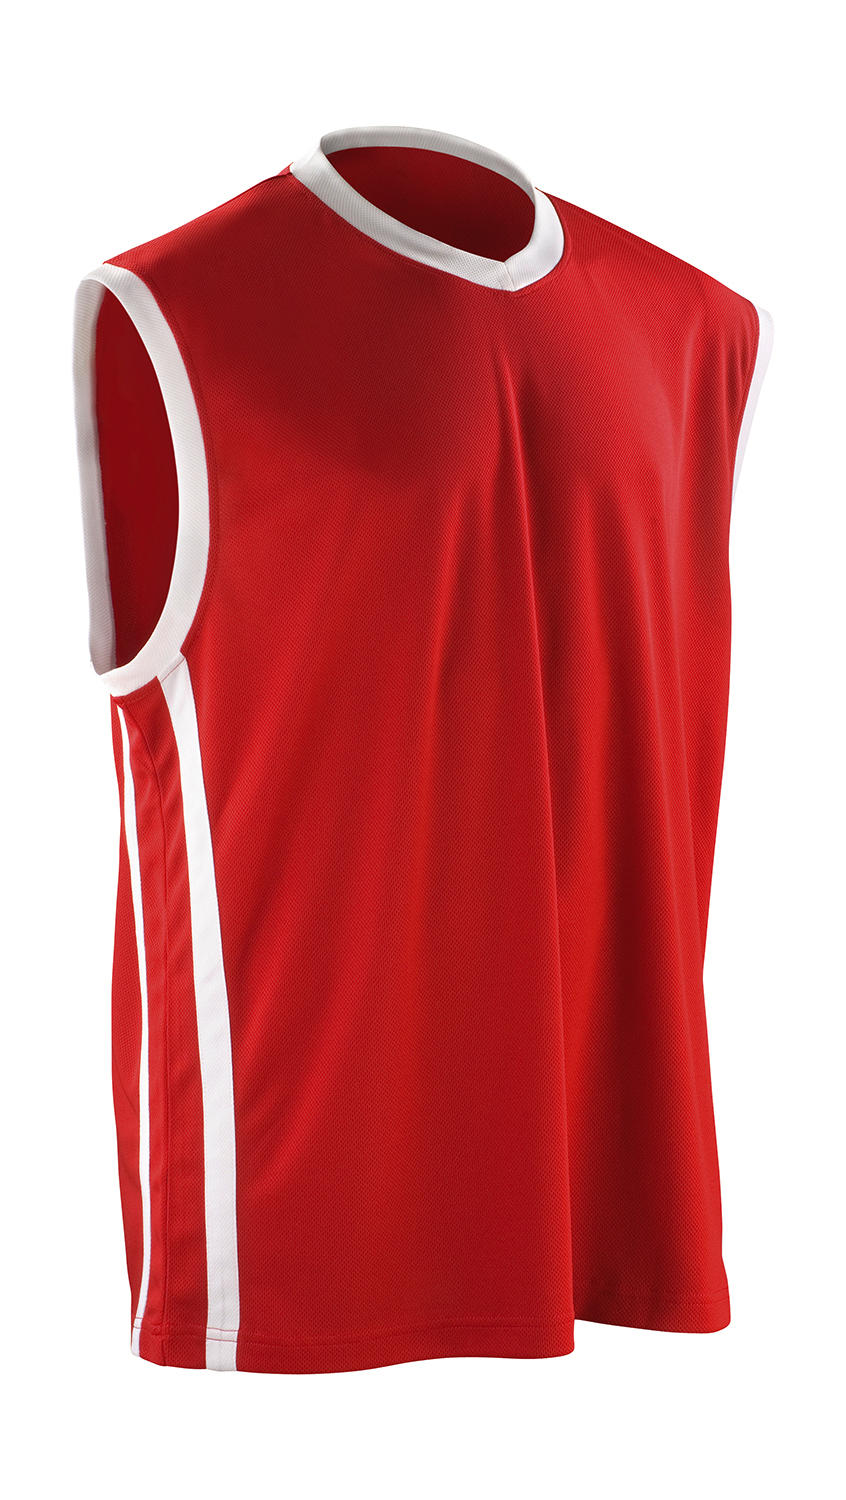  Mens Quick Dry Basketball Top in Farbe Red/White